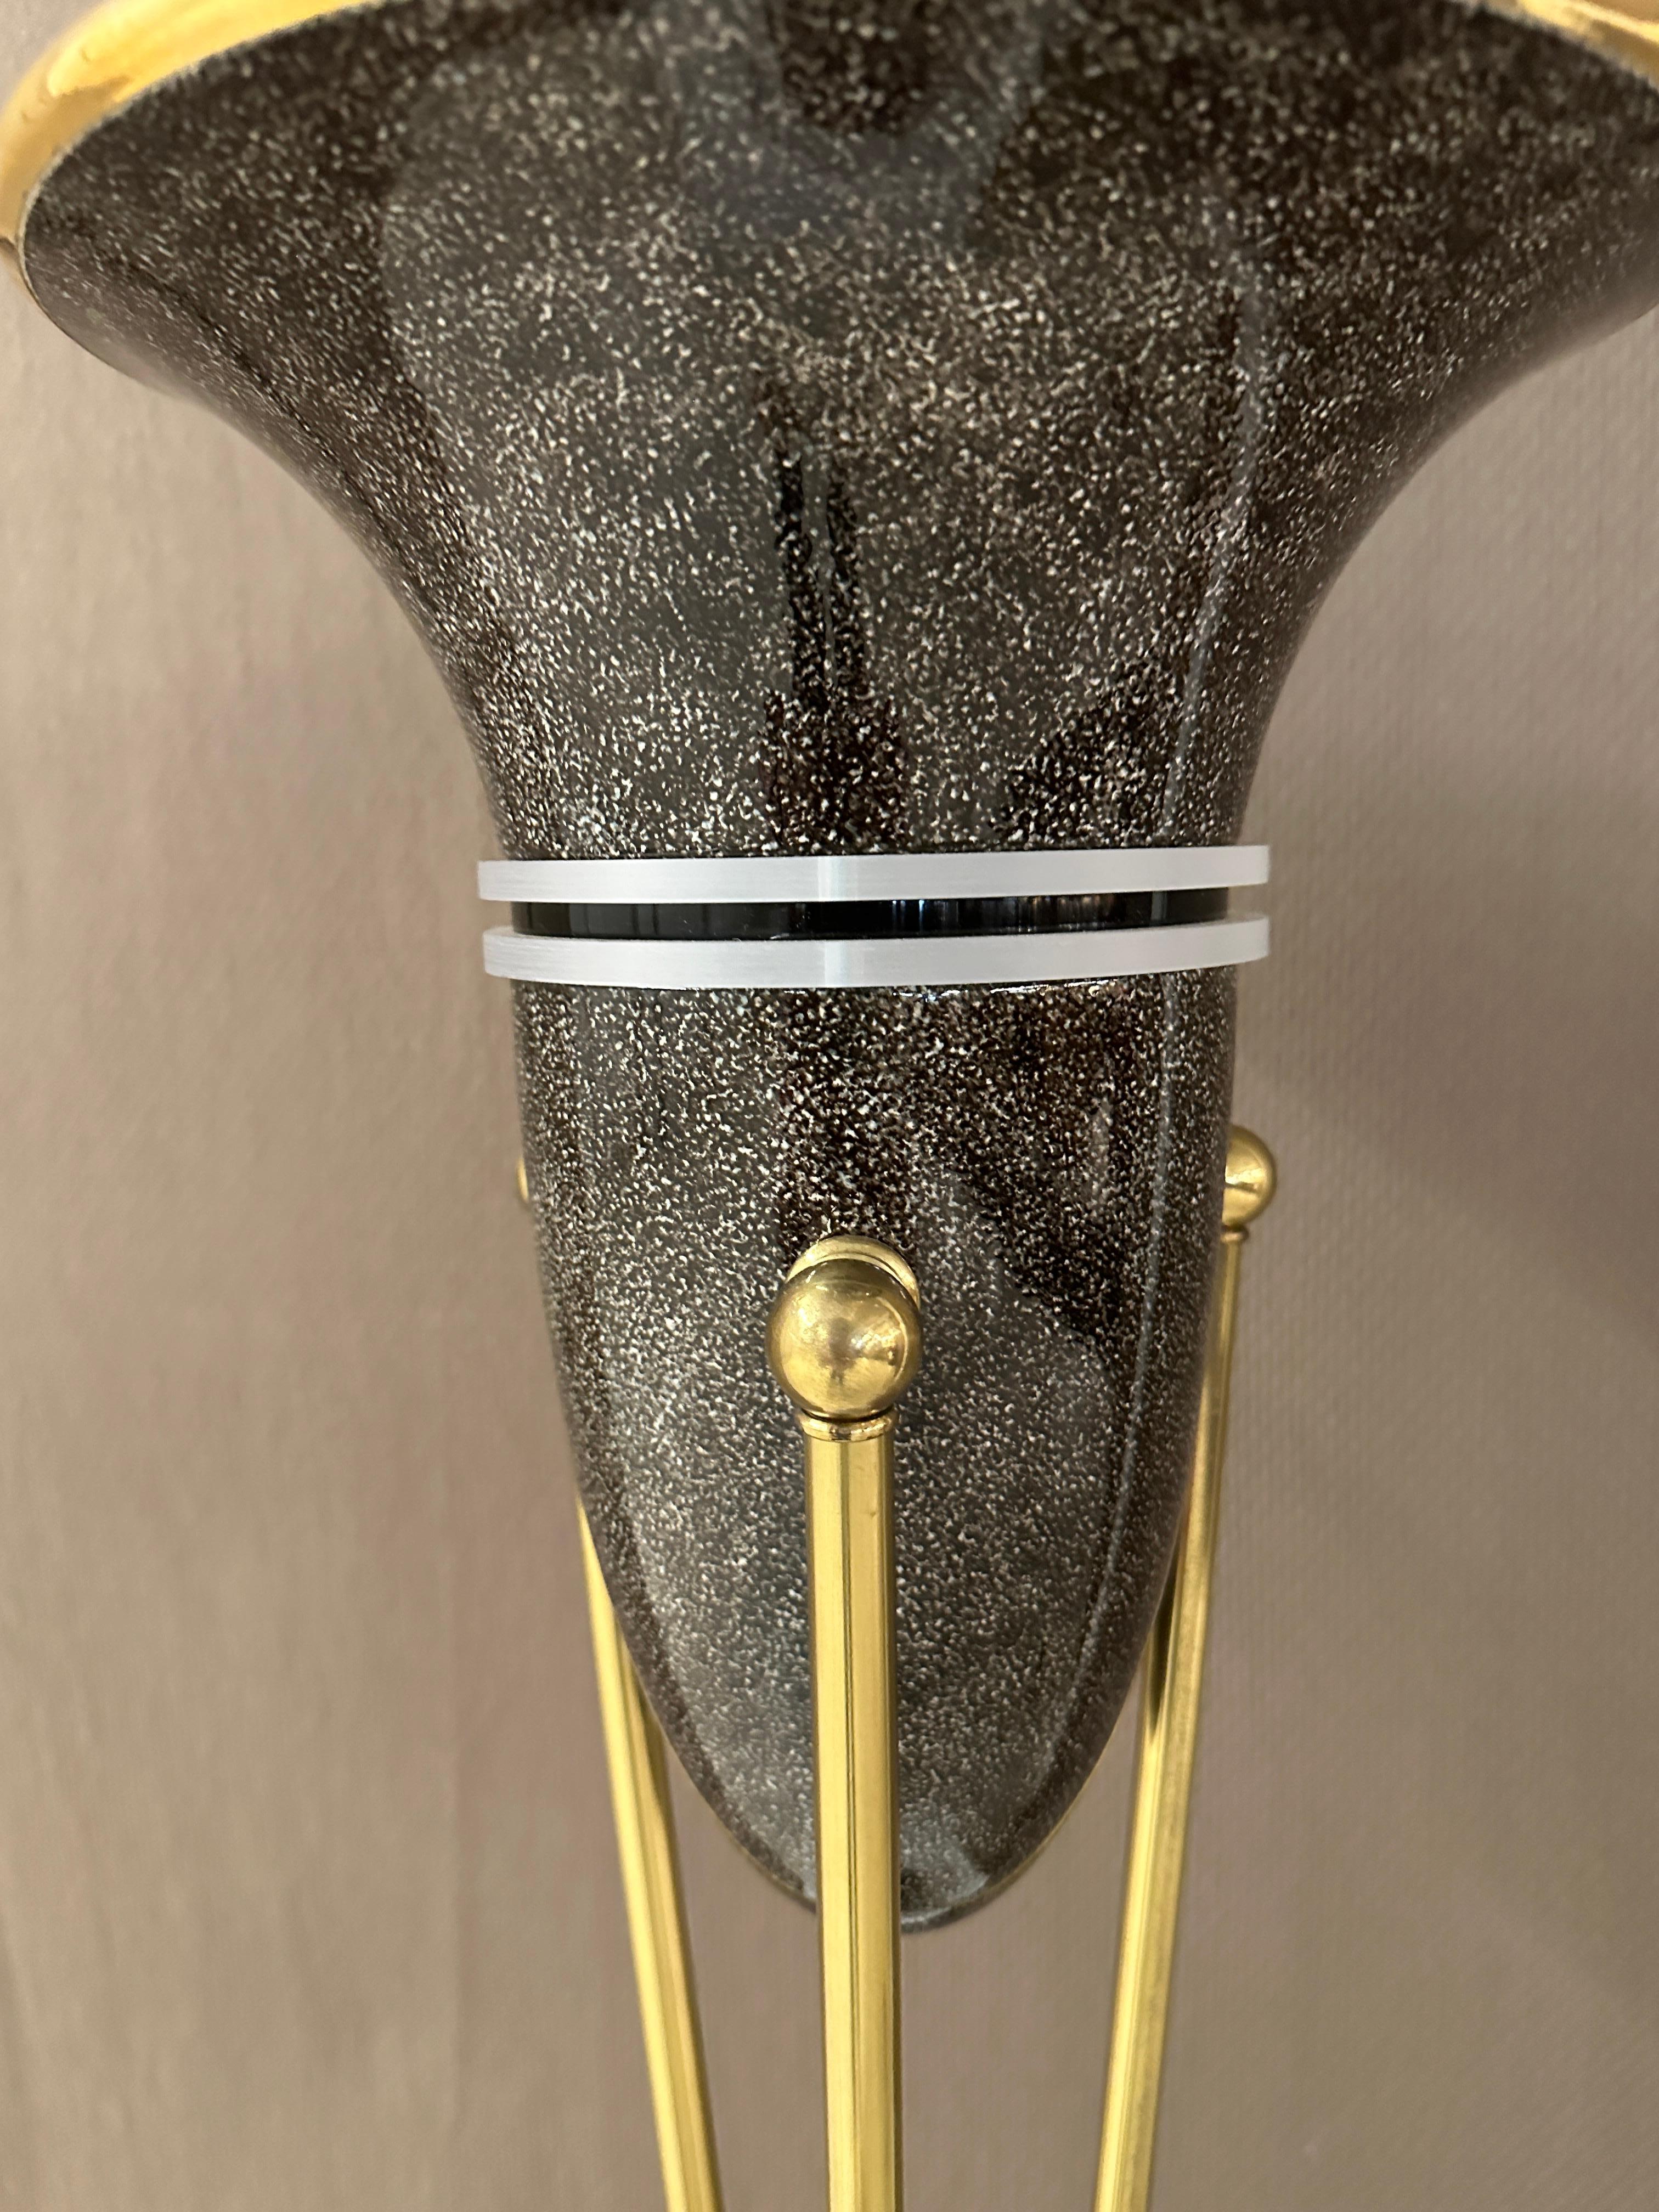 Alan Peterson, a ceramist and designer, crafted this dramatic pair of torchieres. Made of black-flecked grey lacquer ceramic, these pieces feature inverted conical domes, iconic of 1980s style. Supported by three sleek brass arms, the torchieres